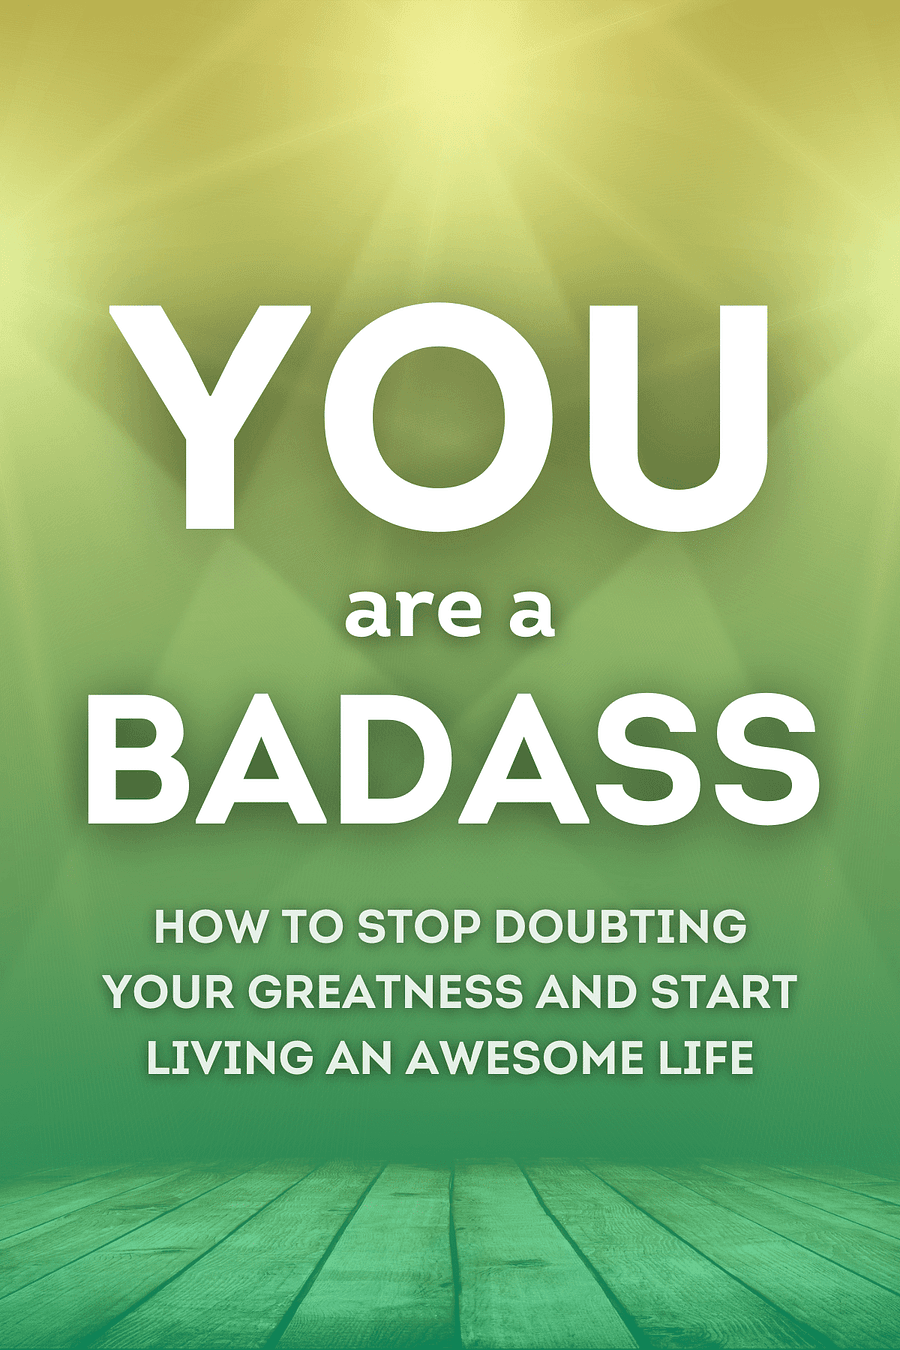 You Are a Badass by Jen Sincero - Book Summary